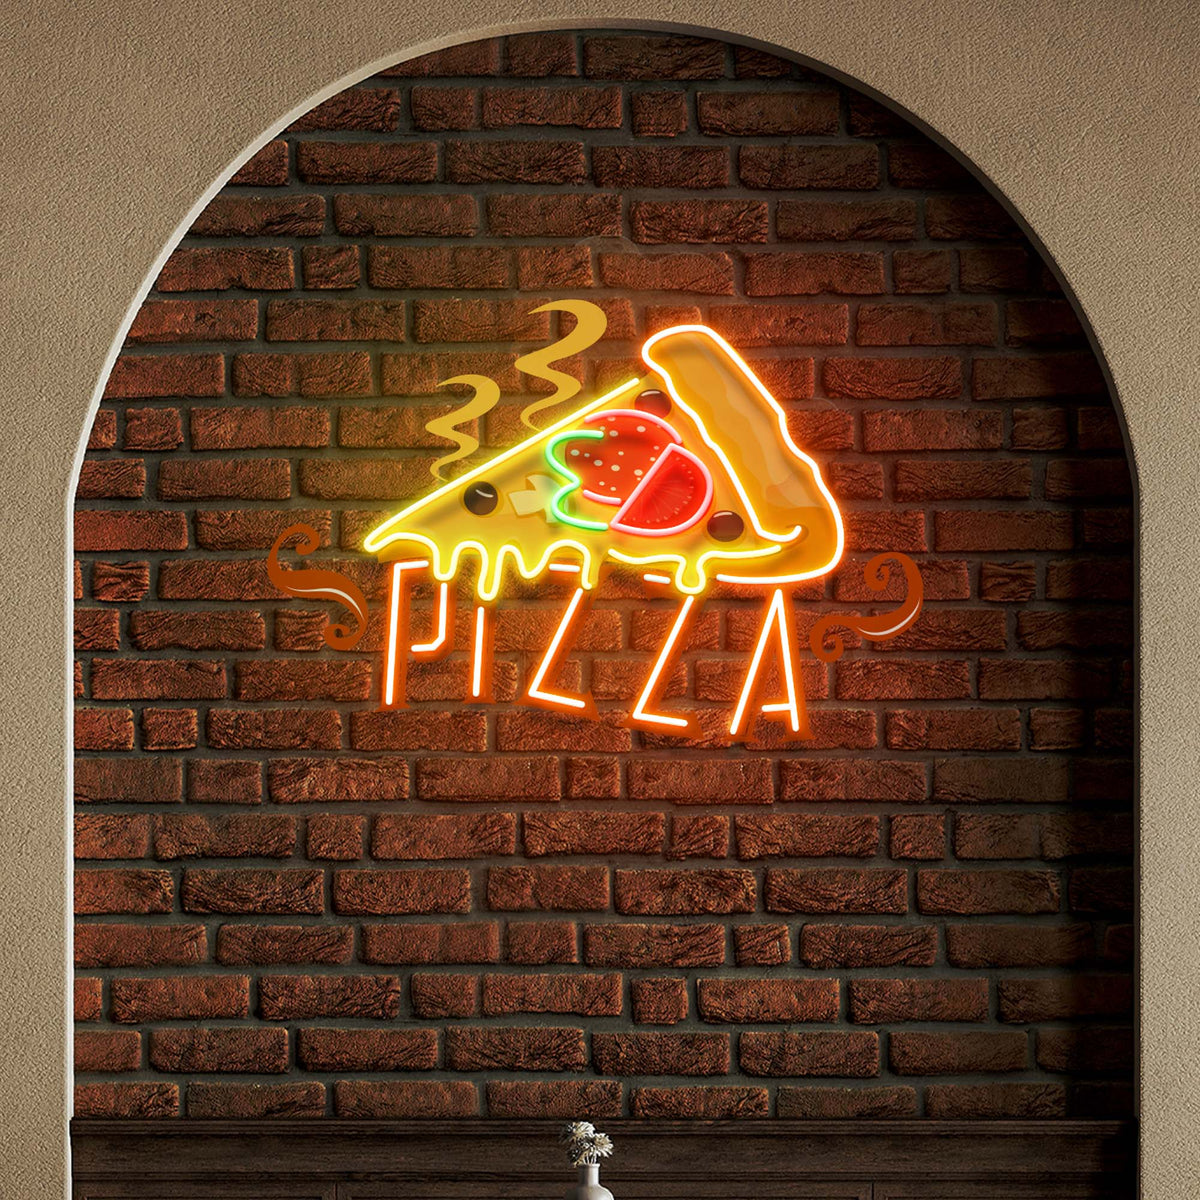 Custom Name Fast Food Restaurant With Pizza Led Neon Sign Light